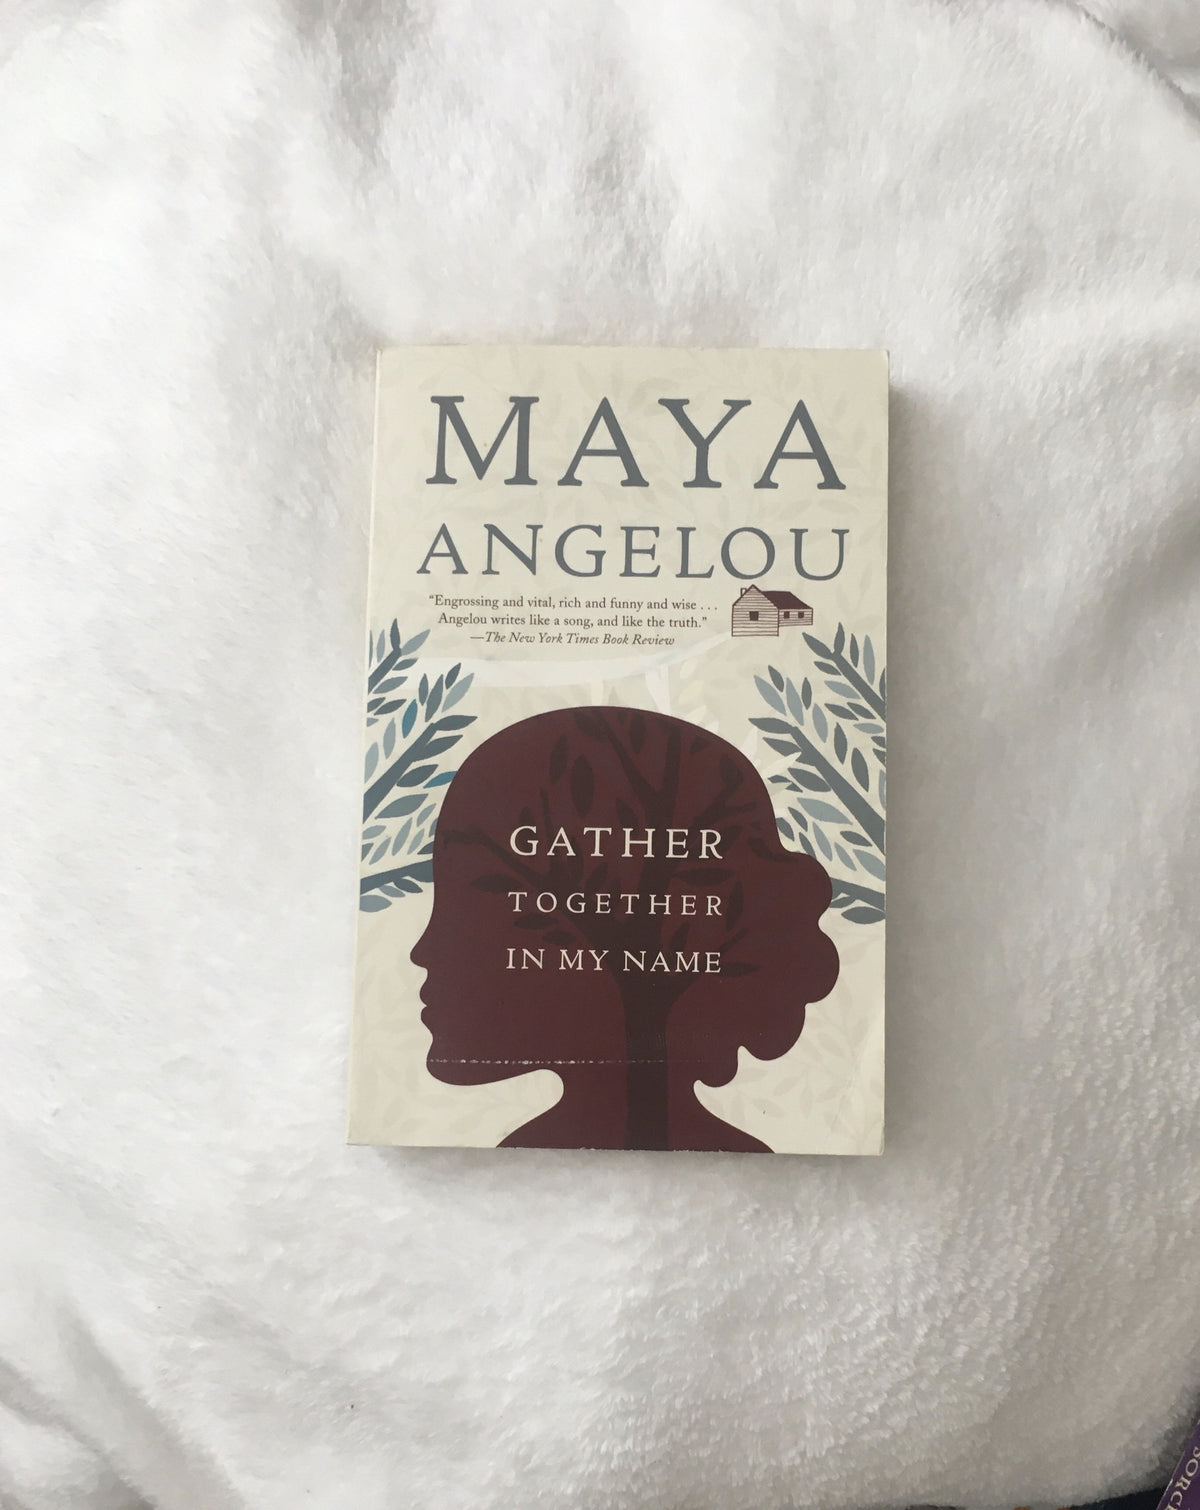 Gather Together in my Name by Maya Angelou, book, Ten Dollar Books, Ten Dollar Books